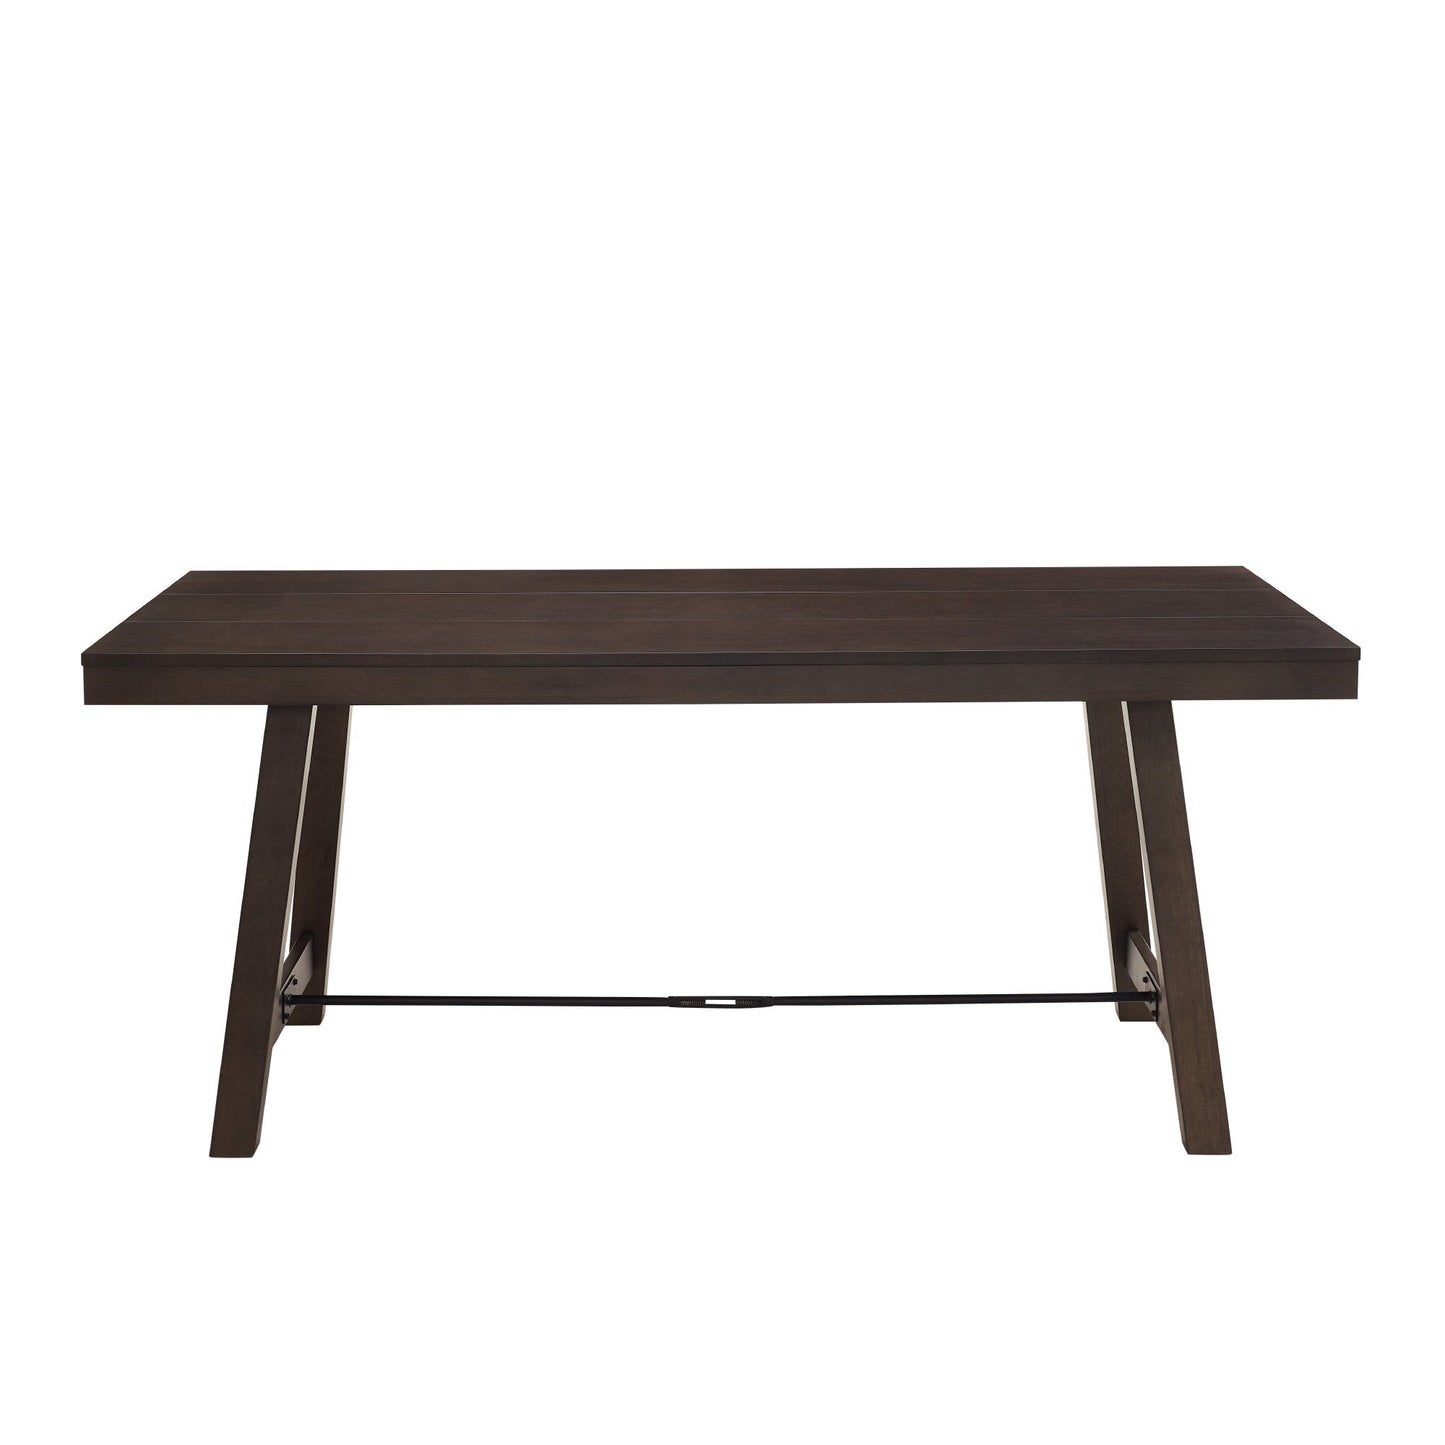 70" Trestle Dining Table